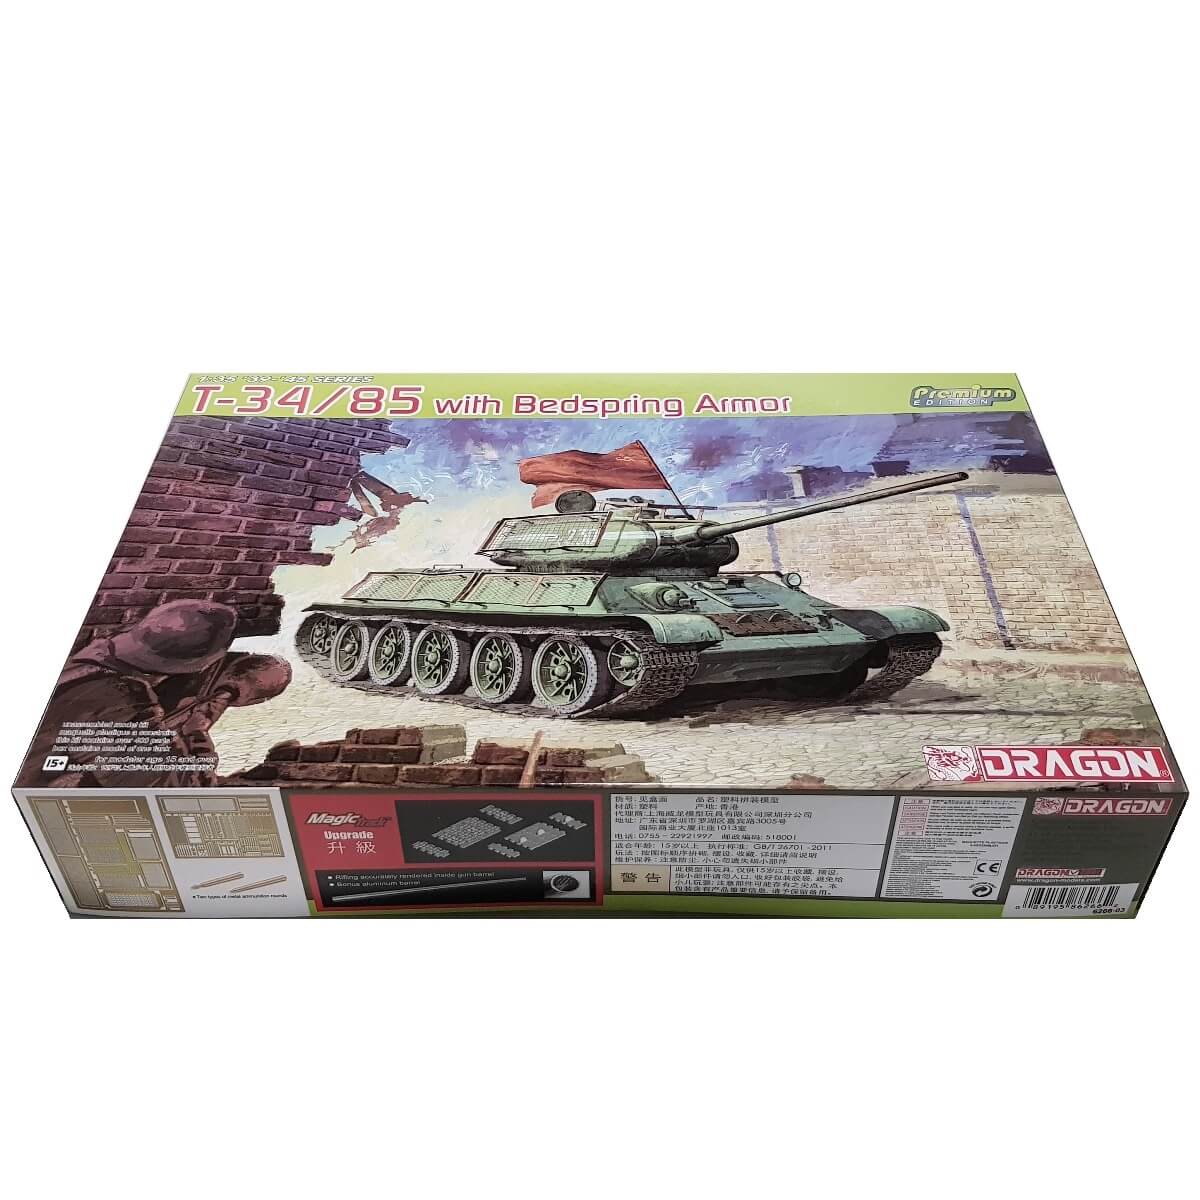 1:35 T-34/85 with Bedspring Armor - Premium Edition - DRAGON